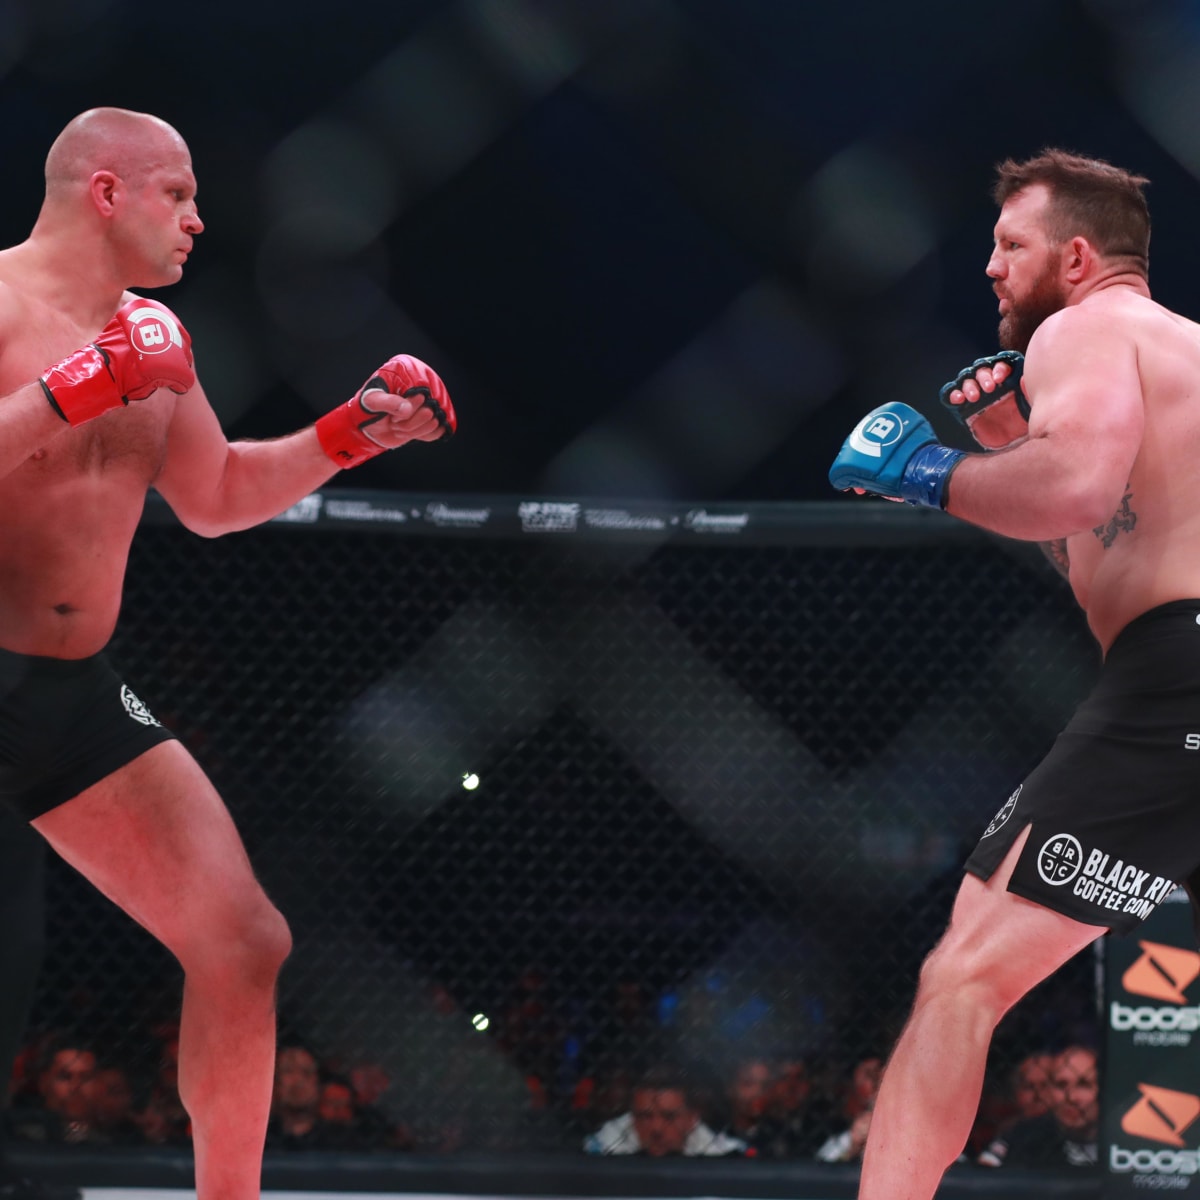 Watch Bellator 290 Bader vs Fedor 2 Stream MMA live, TV channel - How to Watch and Stream Major League and College Sports